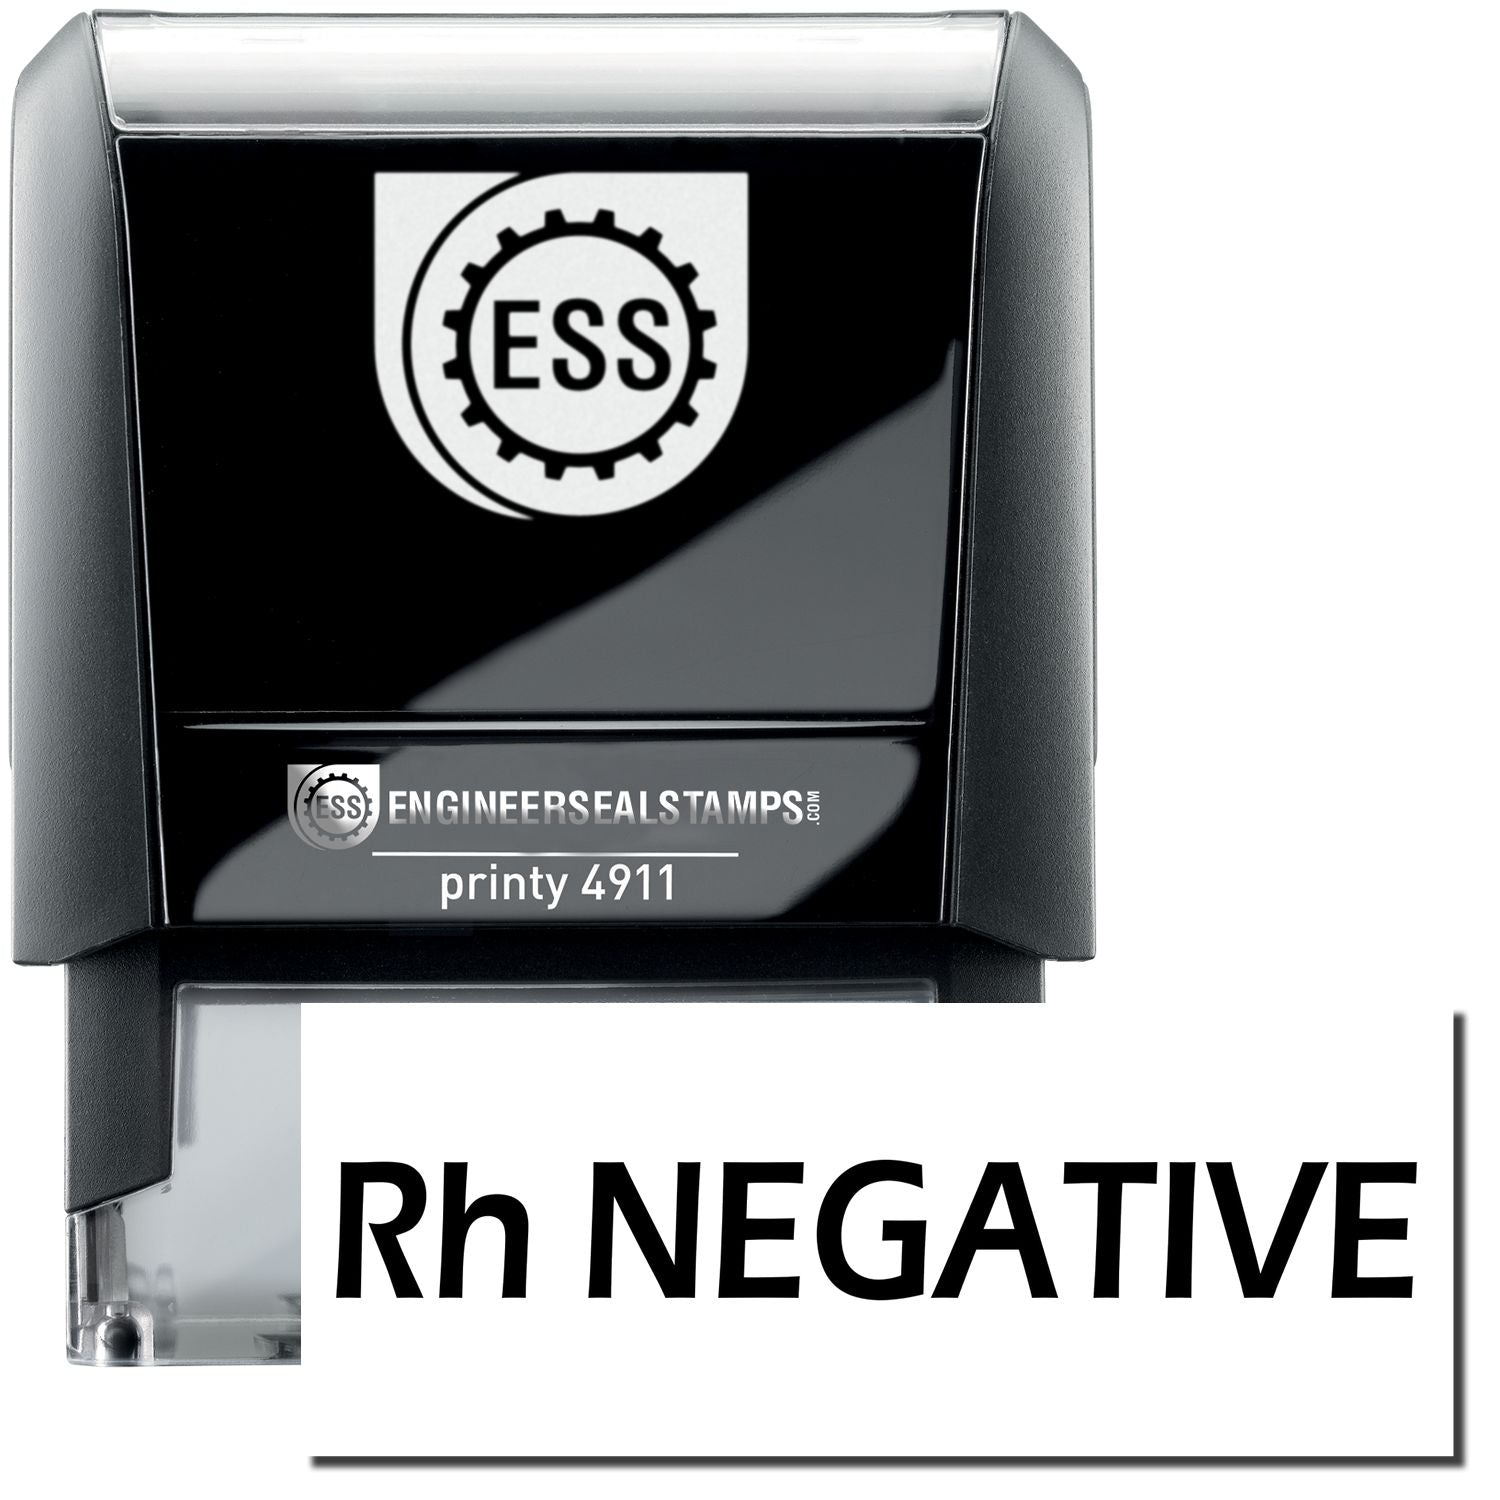 A self-inking stamp with a stamped image showing how the text "Rh NEGATIVE" is displayed after stamping.